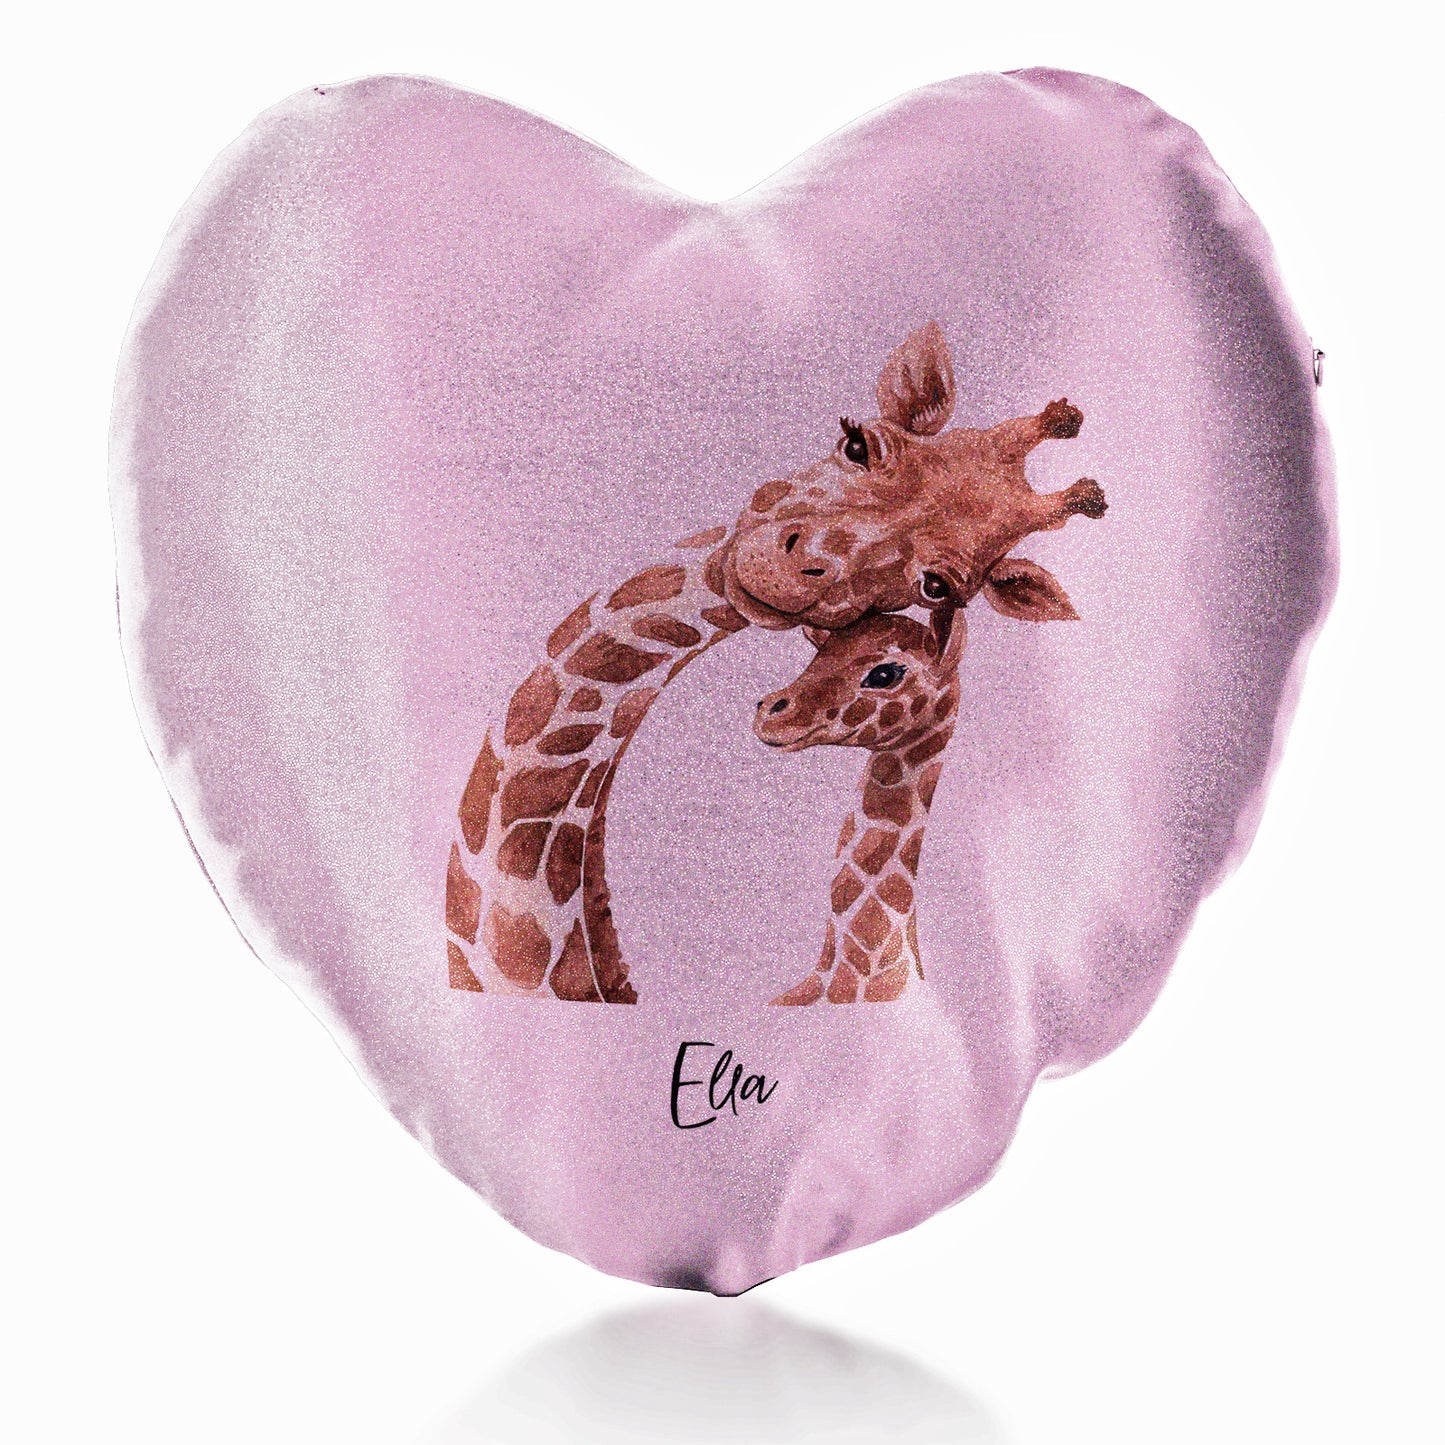 Personalised Glitter Heart Cushion with Welcoming Text and Relaxing Mum and Baby Giraffes